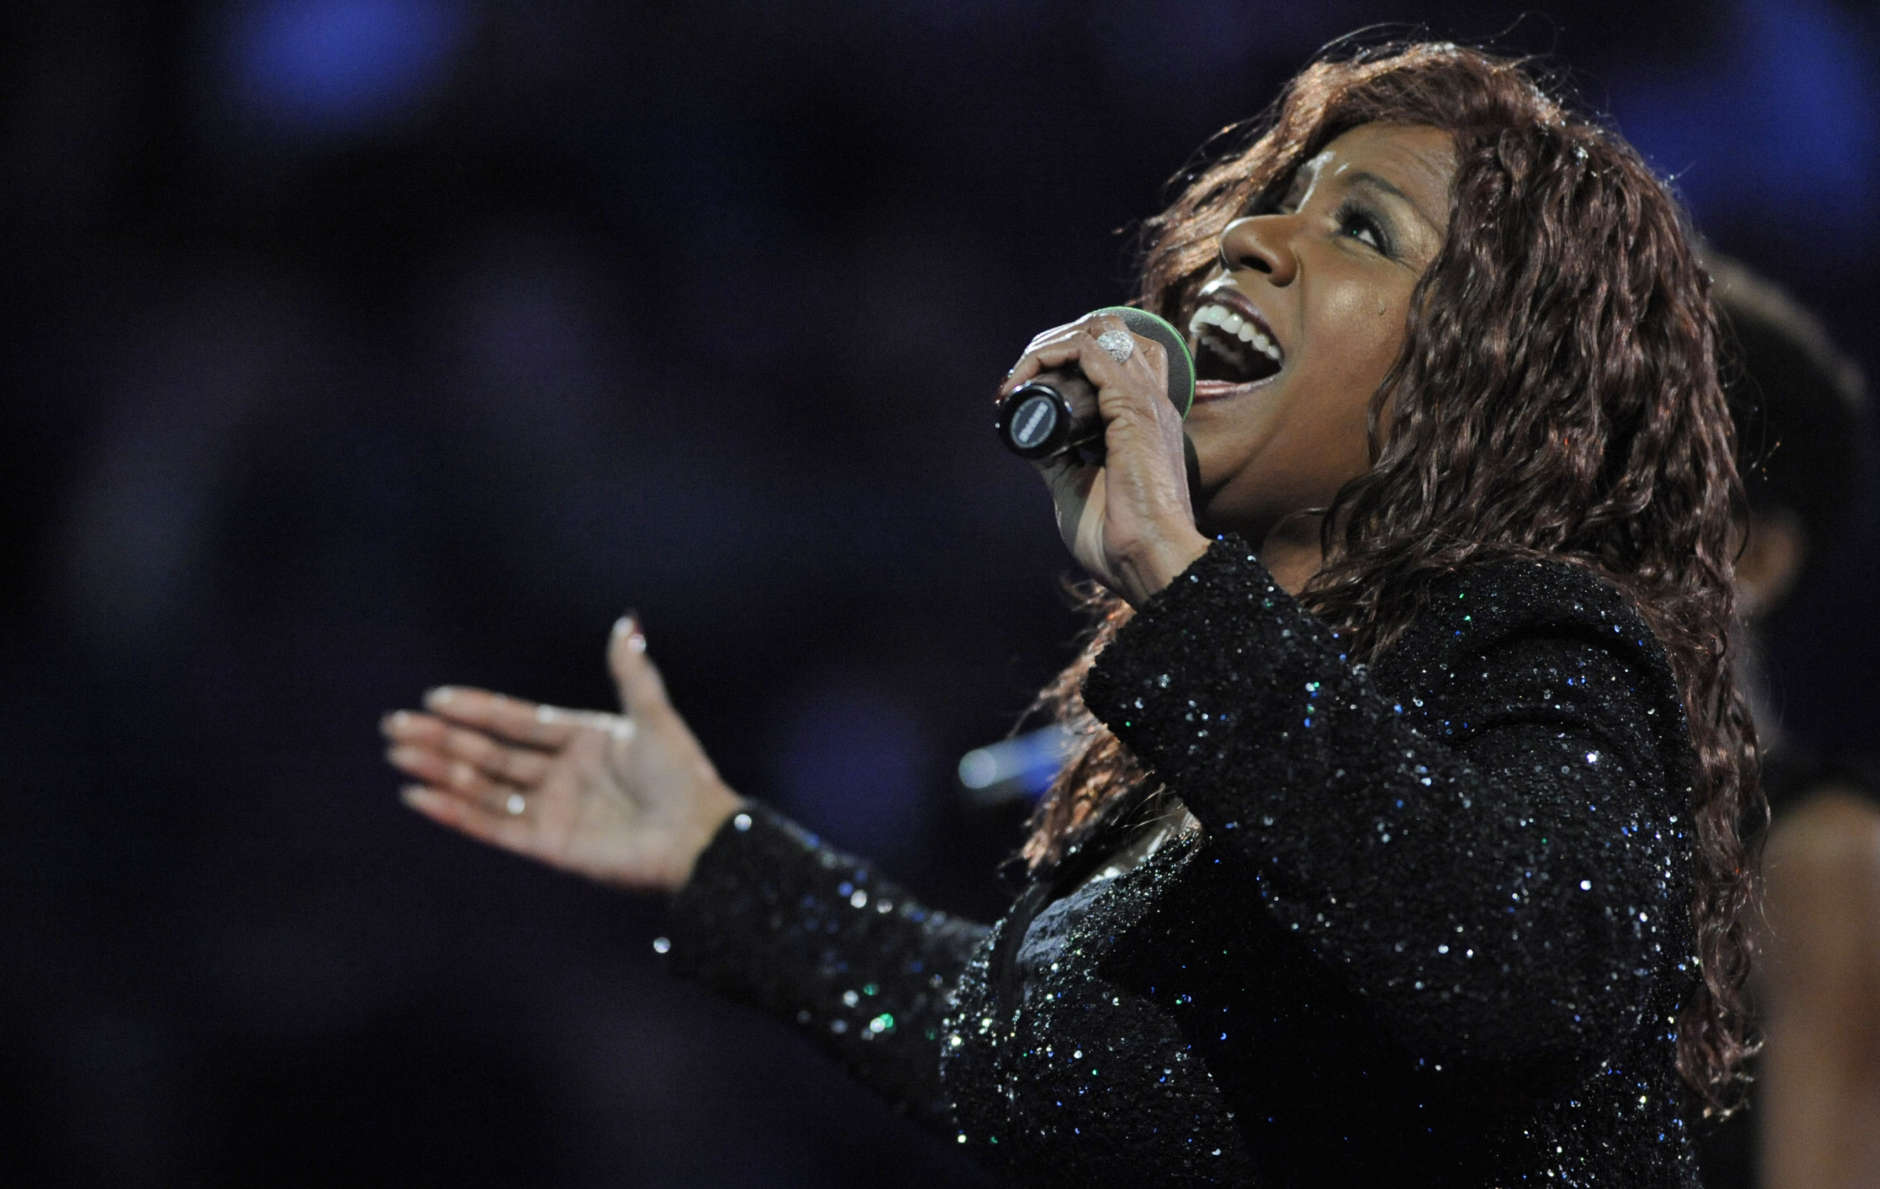 Gloria Gaynor performs before an exhibition tennis match between Ivan Lendl and John McEnroe at Madison Square Garden in New York, Monday, Feb. 28, 2011.  (AP Photo/Henny Ray Abrams)